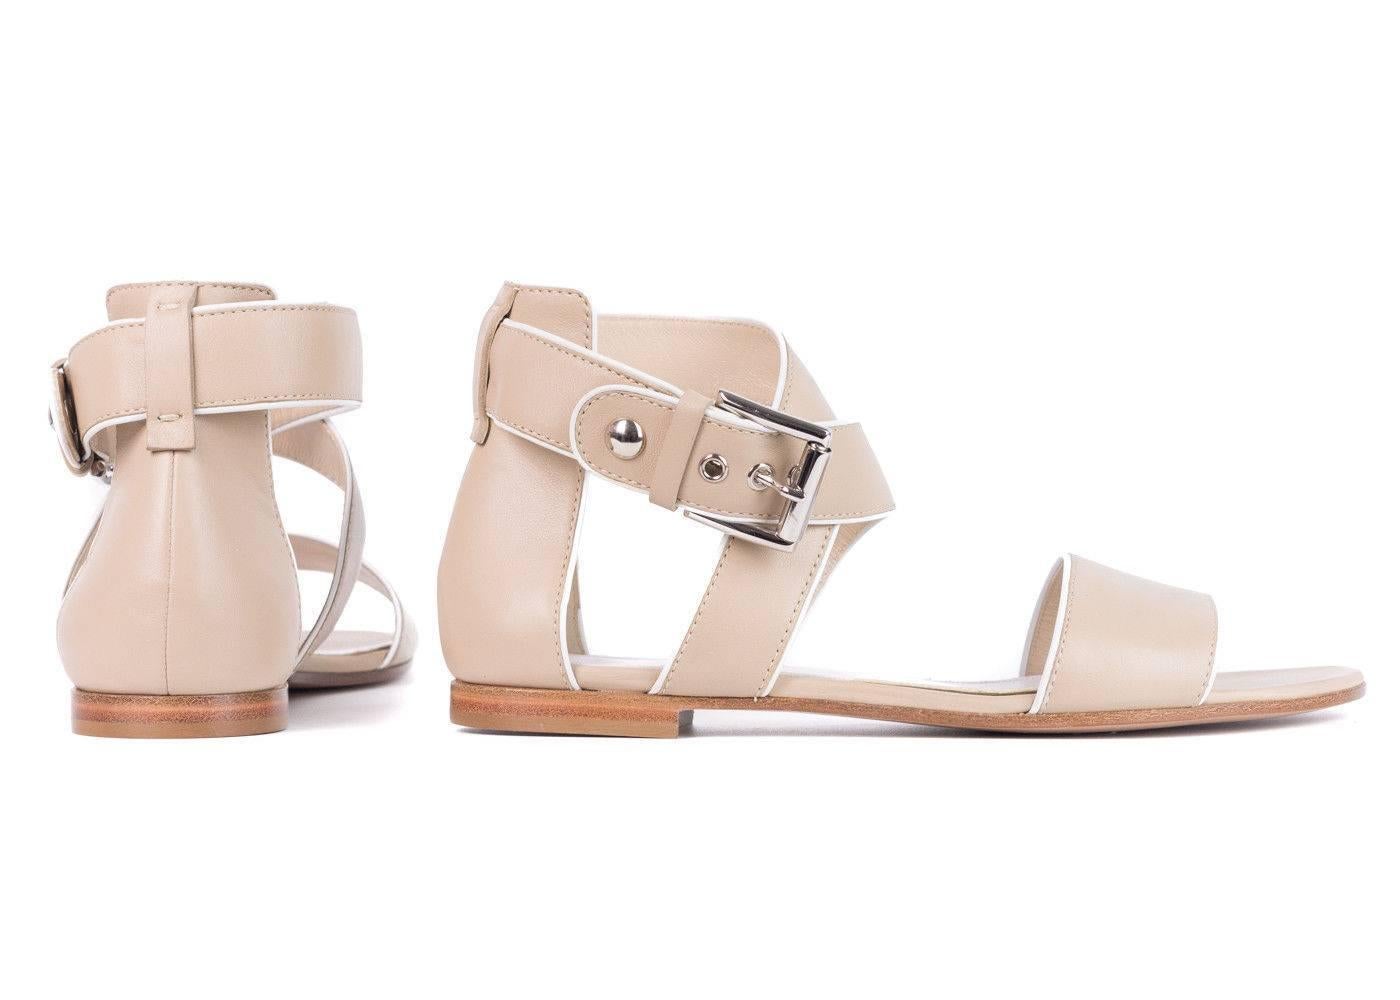 Gianvito Rossi Beige Piped Leather Crisscross Buckle Sandals  In New Condition For Sale In Brooklyn, NY